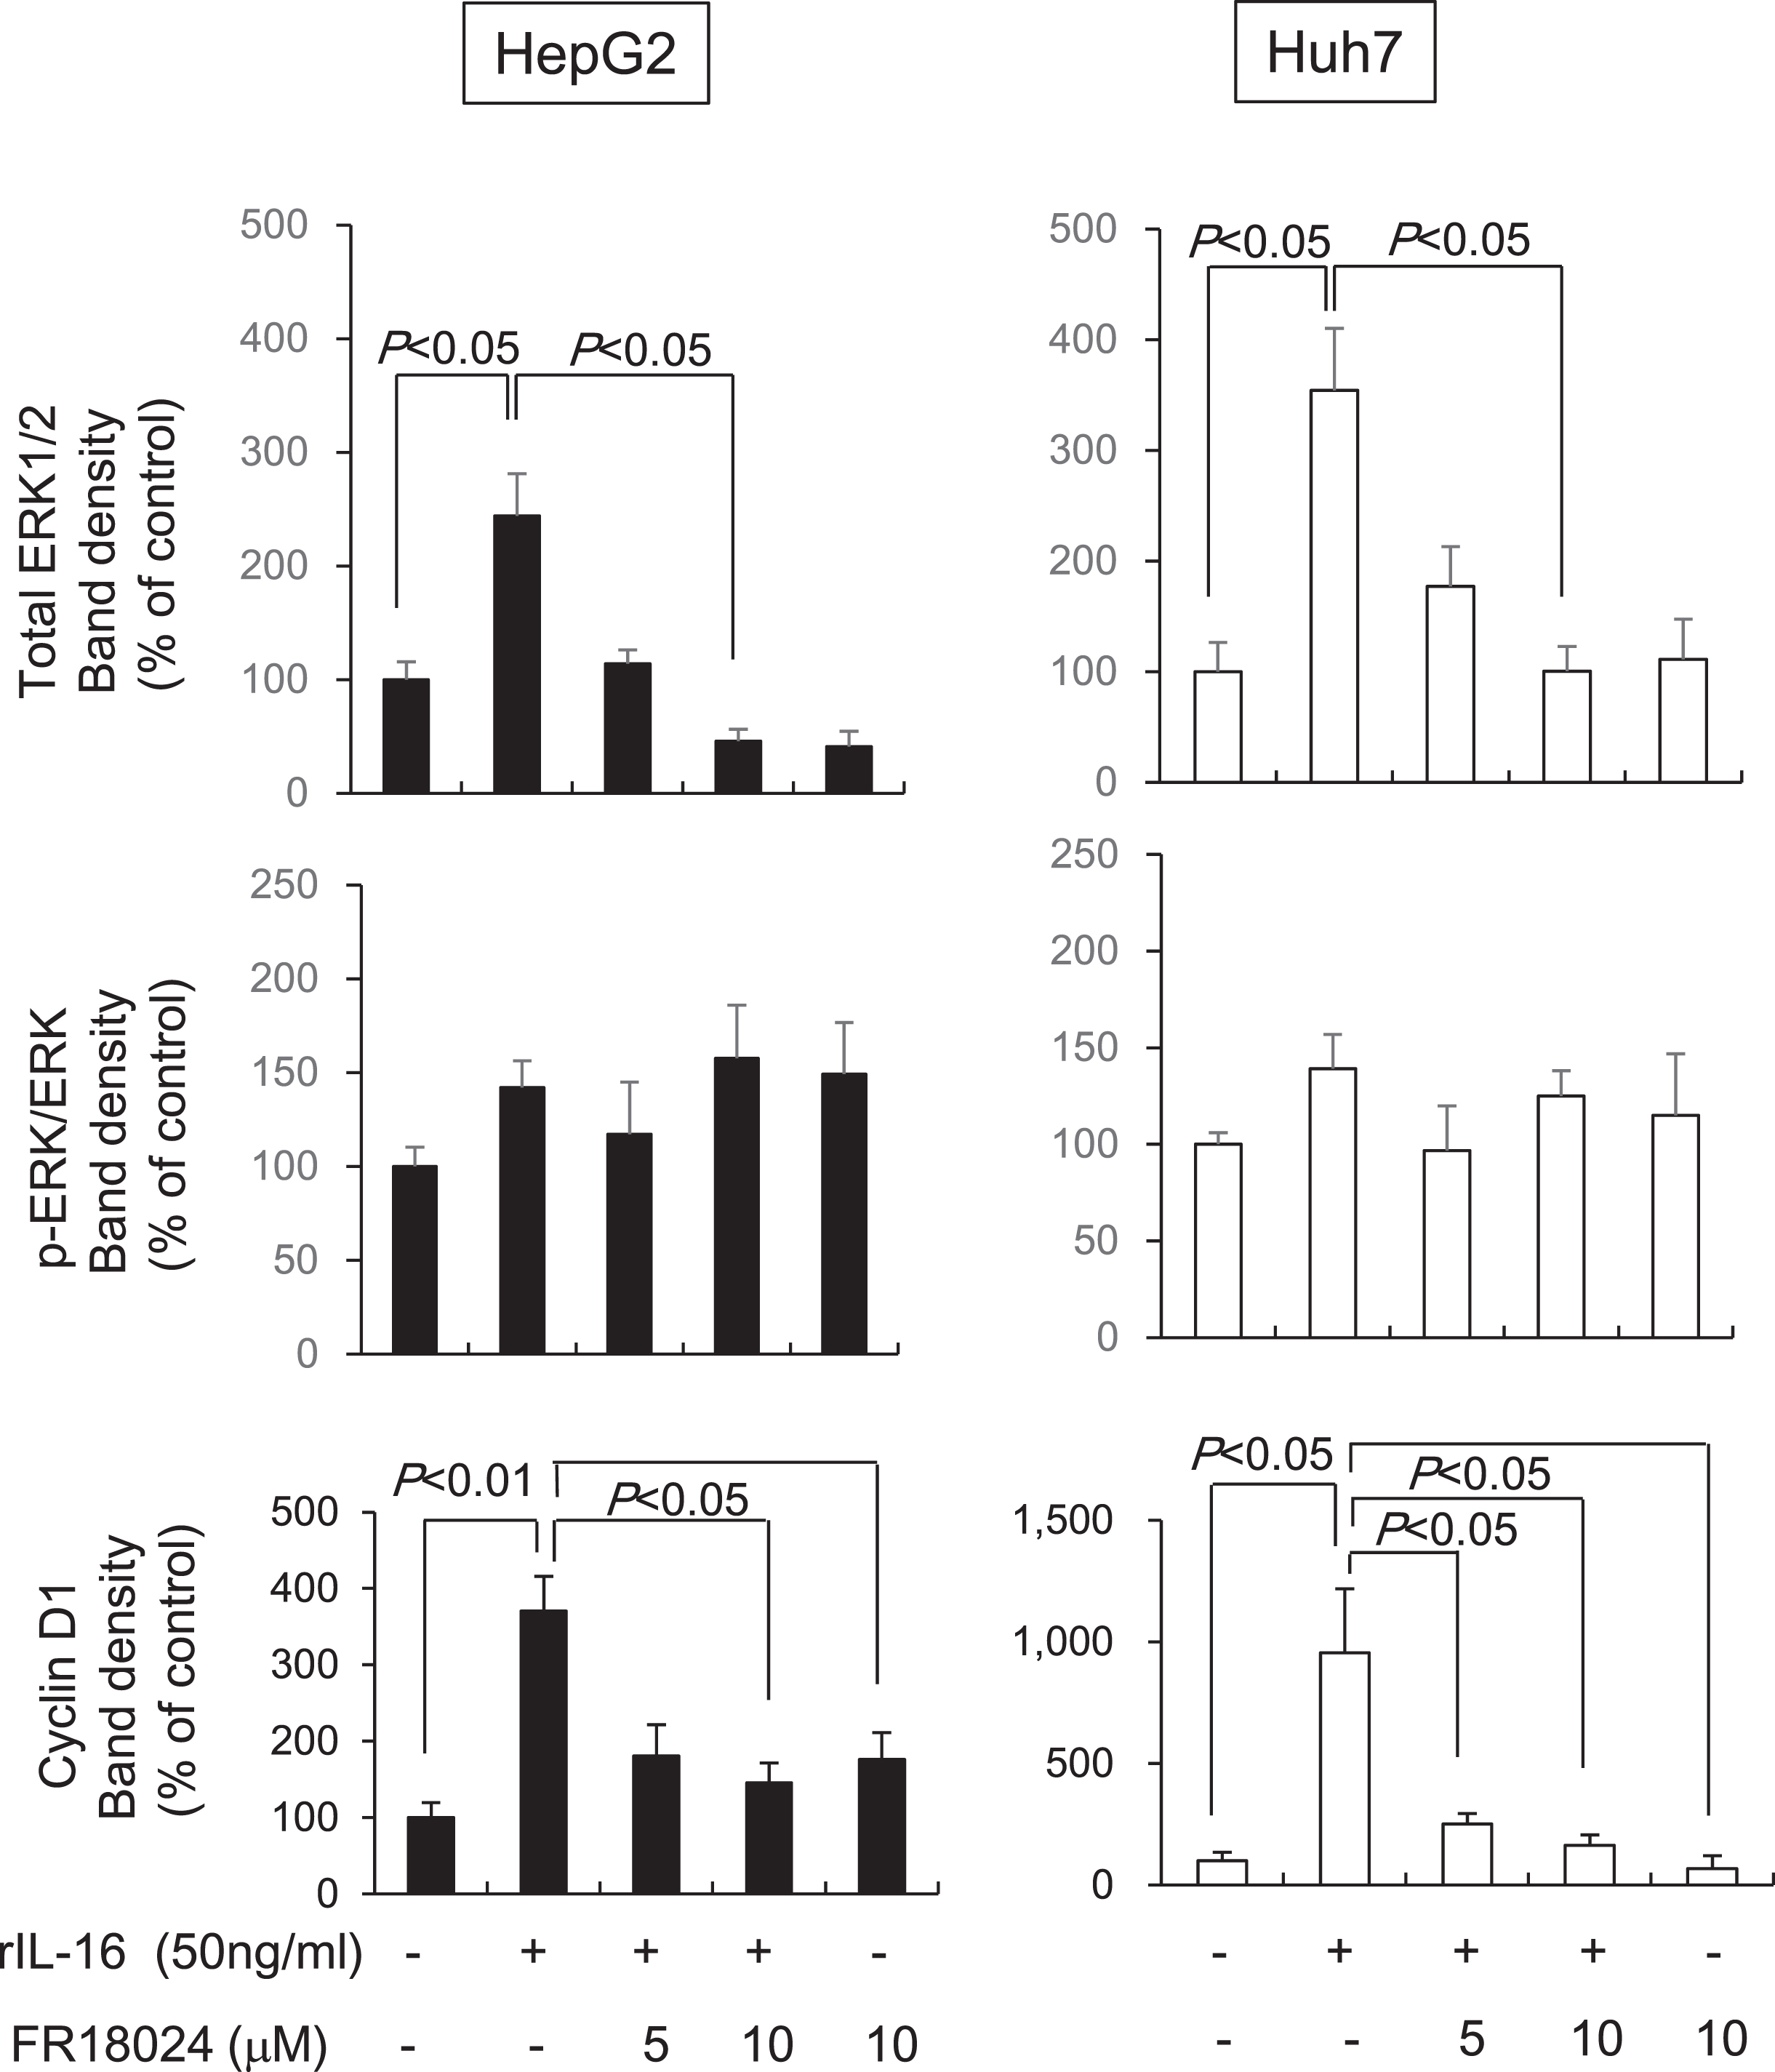 The ERK inhibitor, FR18024, decreases the rIL-16-induced increases of ERK1/2 and cyclin D1 protein expression in HepG2 and Huh7 cells. The two HCC cell lines were pretreated with 50 ng/mL FR18024 followed by a 48-h incubation with rIL-16. ERK1/2 and cyclin D1 protein expression in HepG2 and Huh7 cells treated with IL-16 were determined by western blot analysis. α-Tubulin was used as a loading control and to normalize protein intensities. Data represent six independent experiments. N, number of samples.